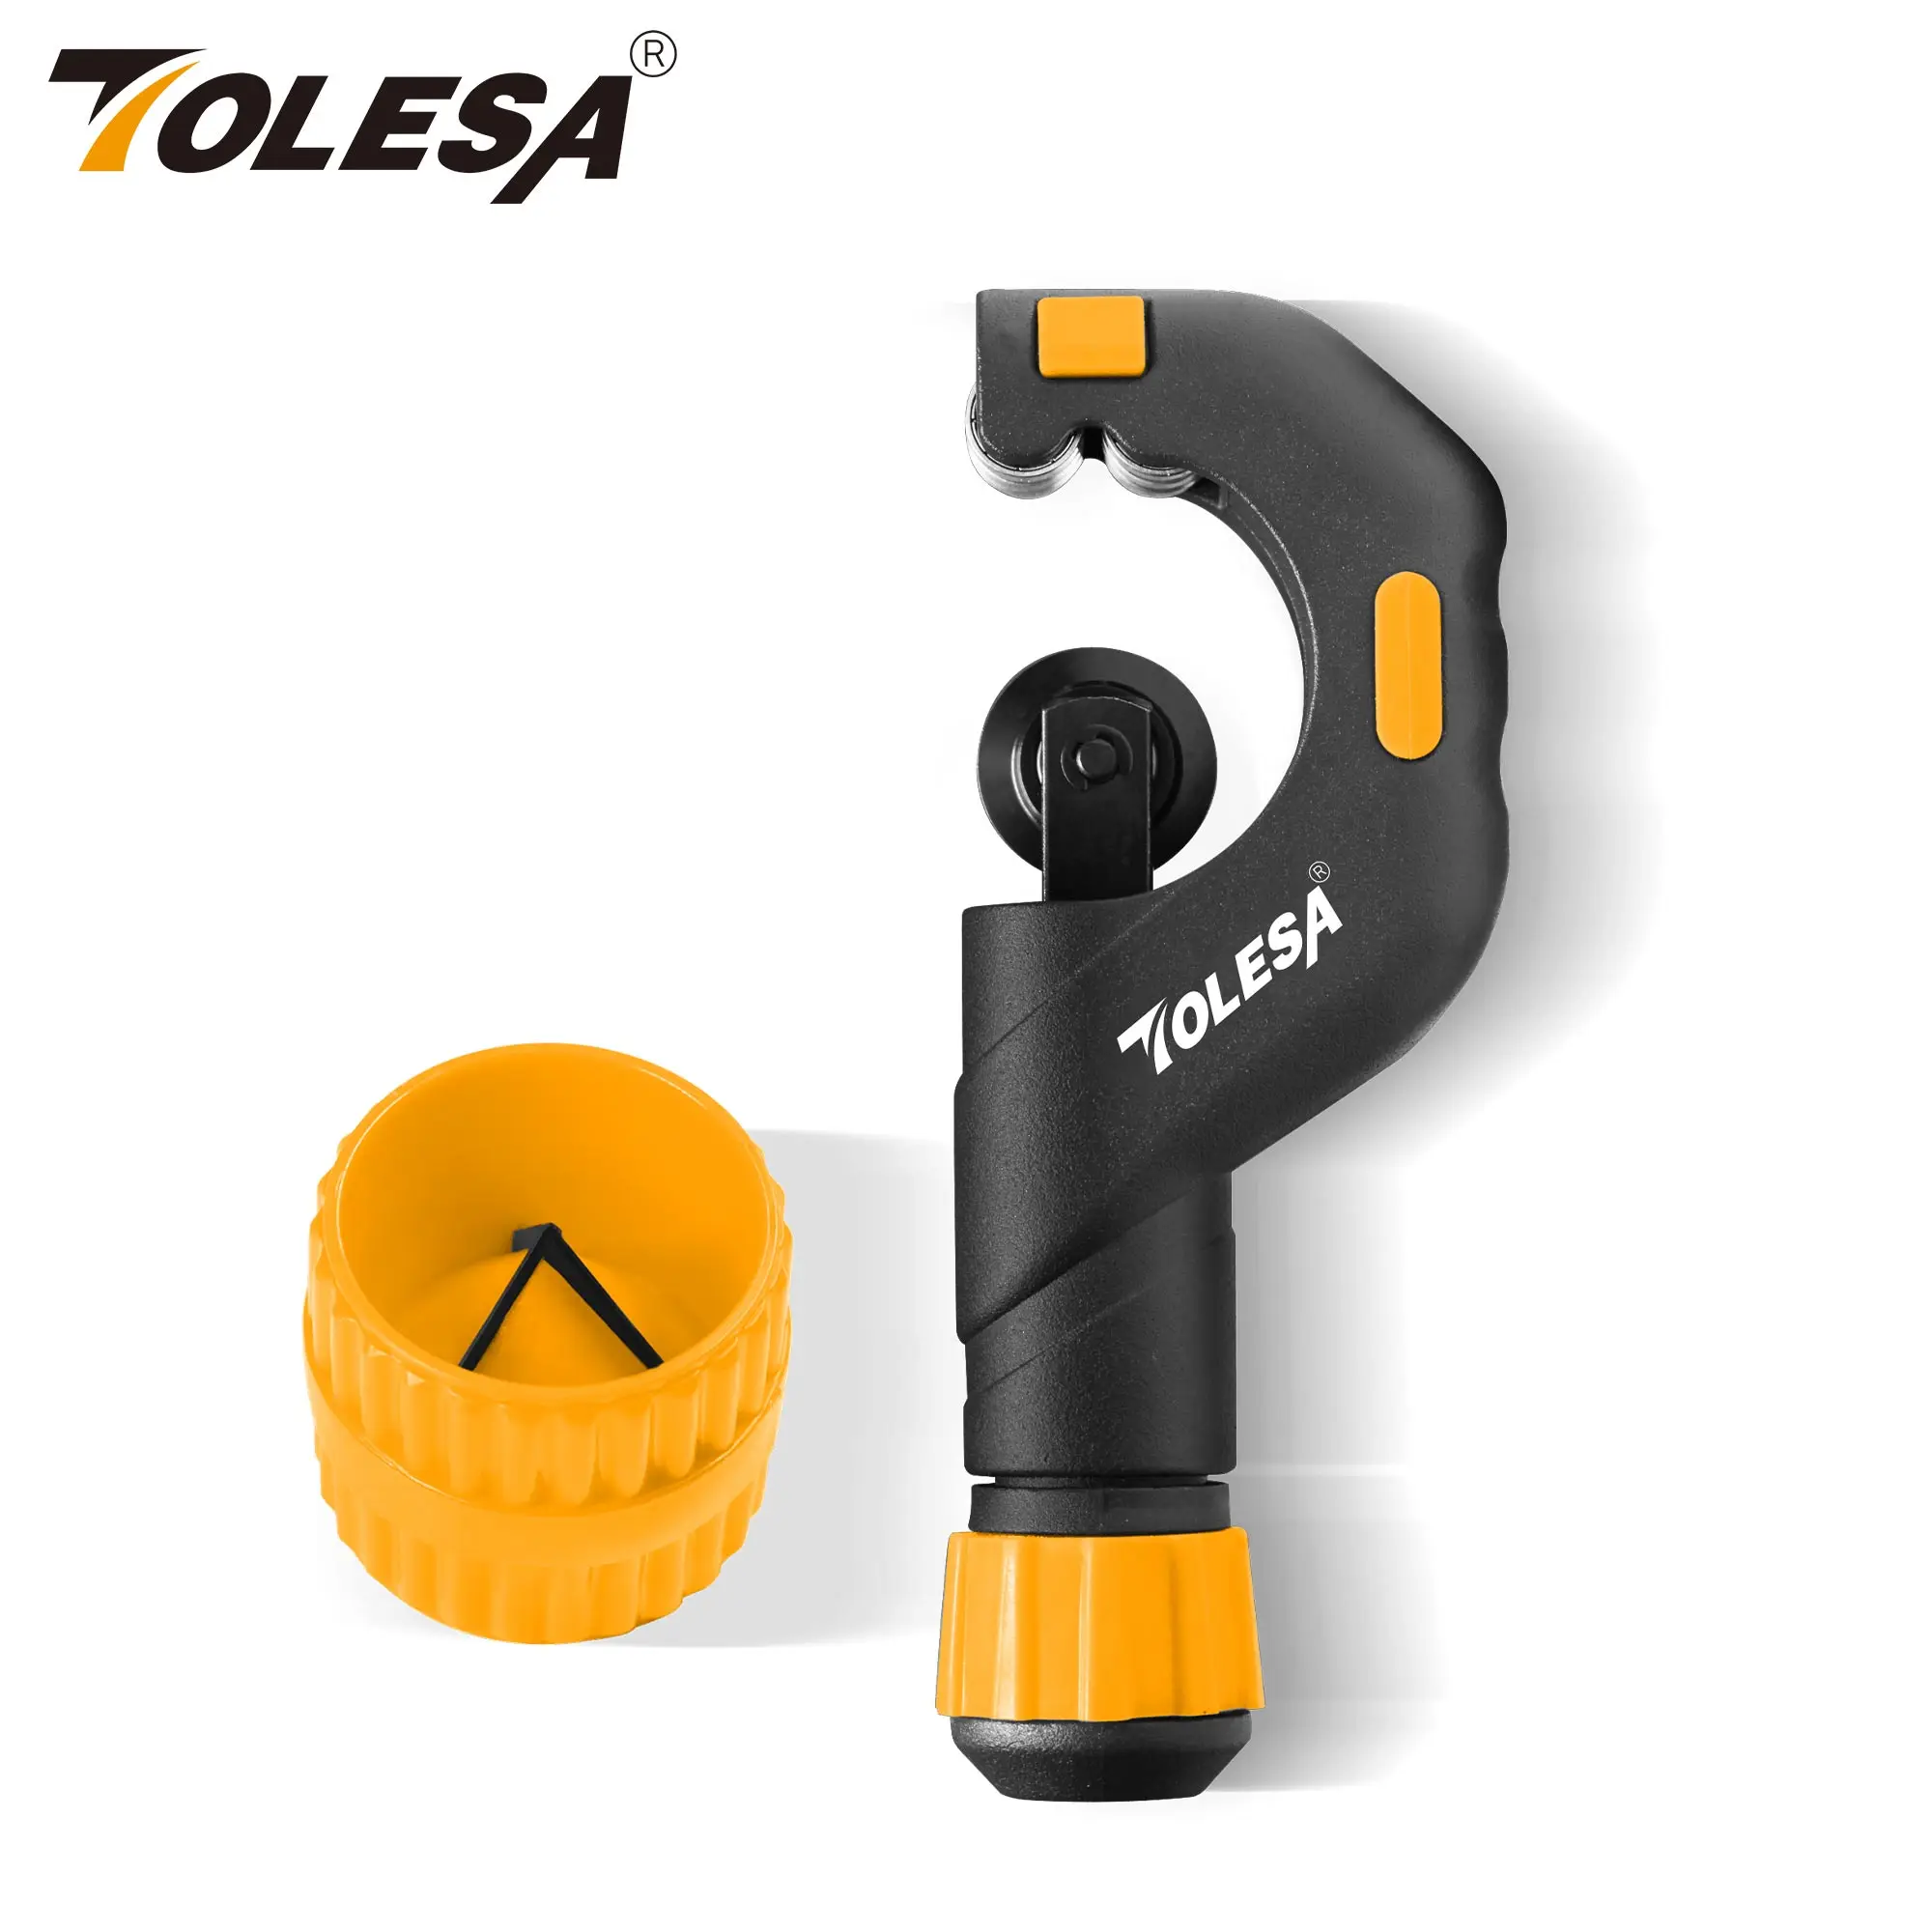 TOLESA 5-50mm Pipe Cutter Tools Heavy Duty Tube Cutter for Cutting Plastic Pipe Copper Brass Aluminum Thin Stainless Steel Pipe